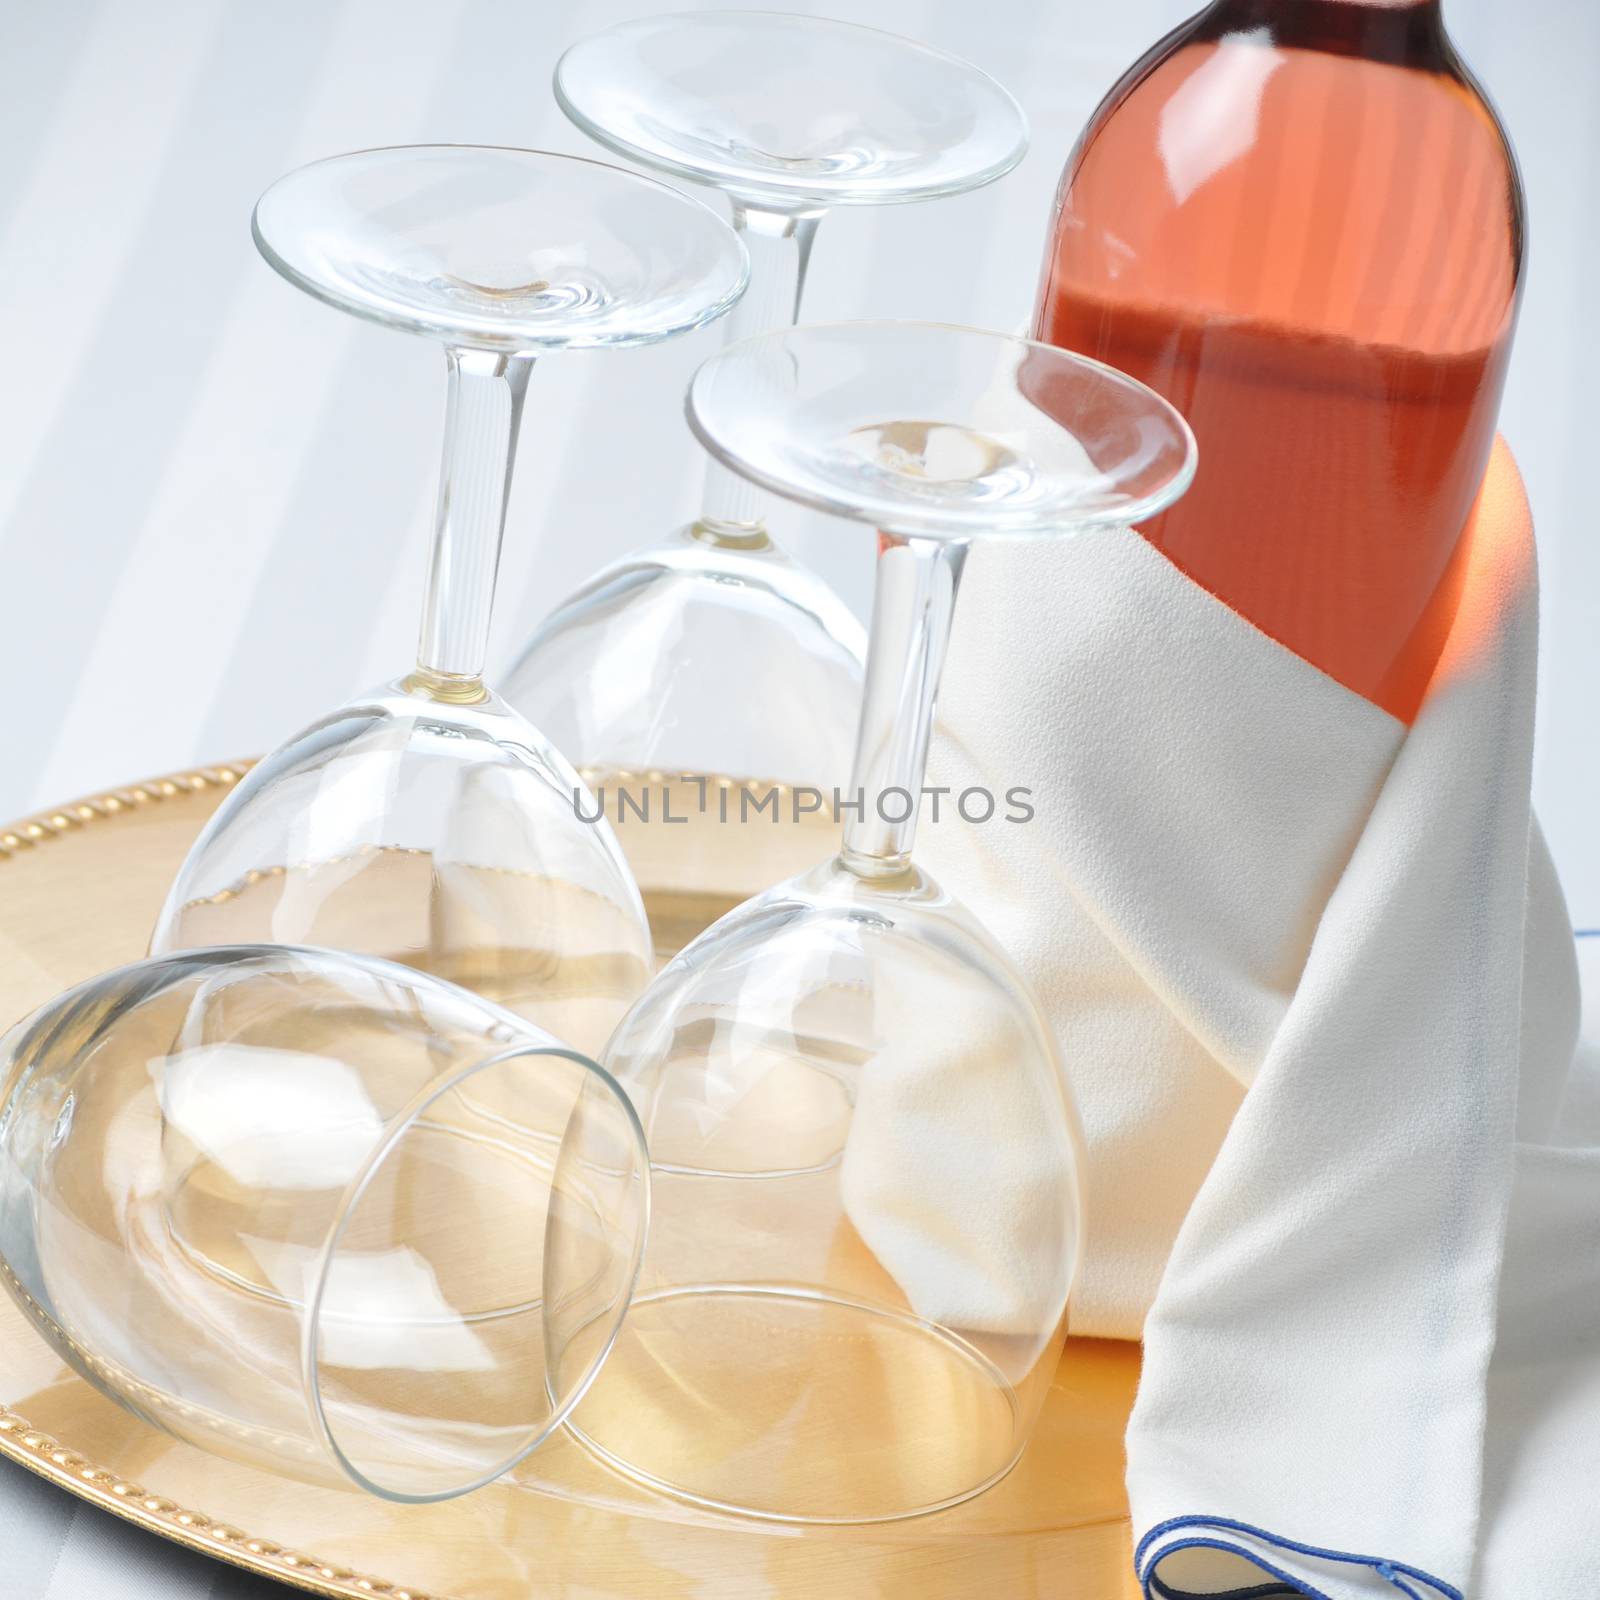 Wine Still Life: Blush Wine Bottle and Glasses on Tray with Glasses, square format.